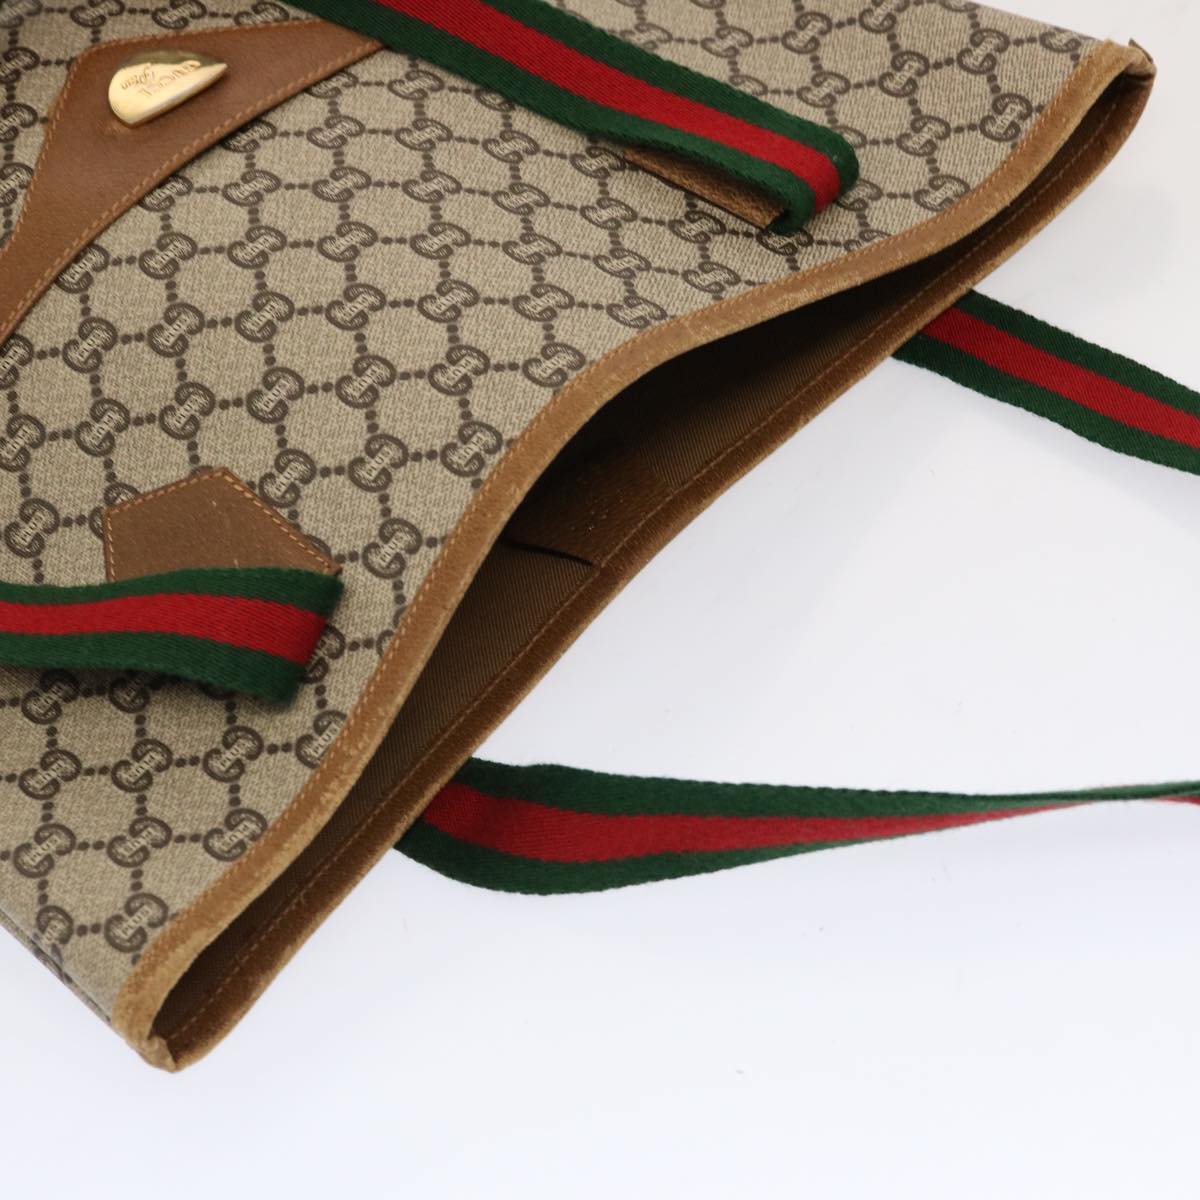 GUCCI GG Plus Supreme Web Sherry Line Tote Bag PVC Red Beige Green Auth ep3791